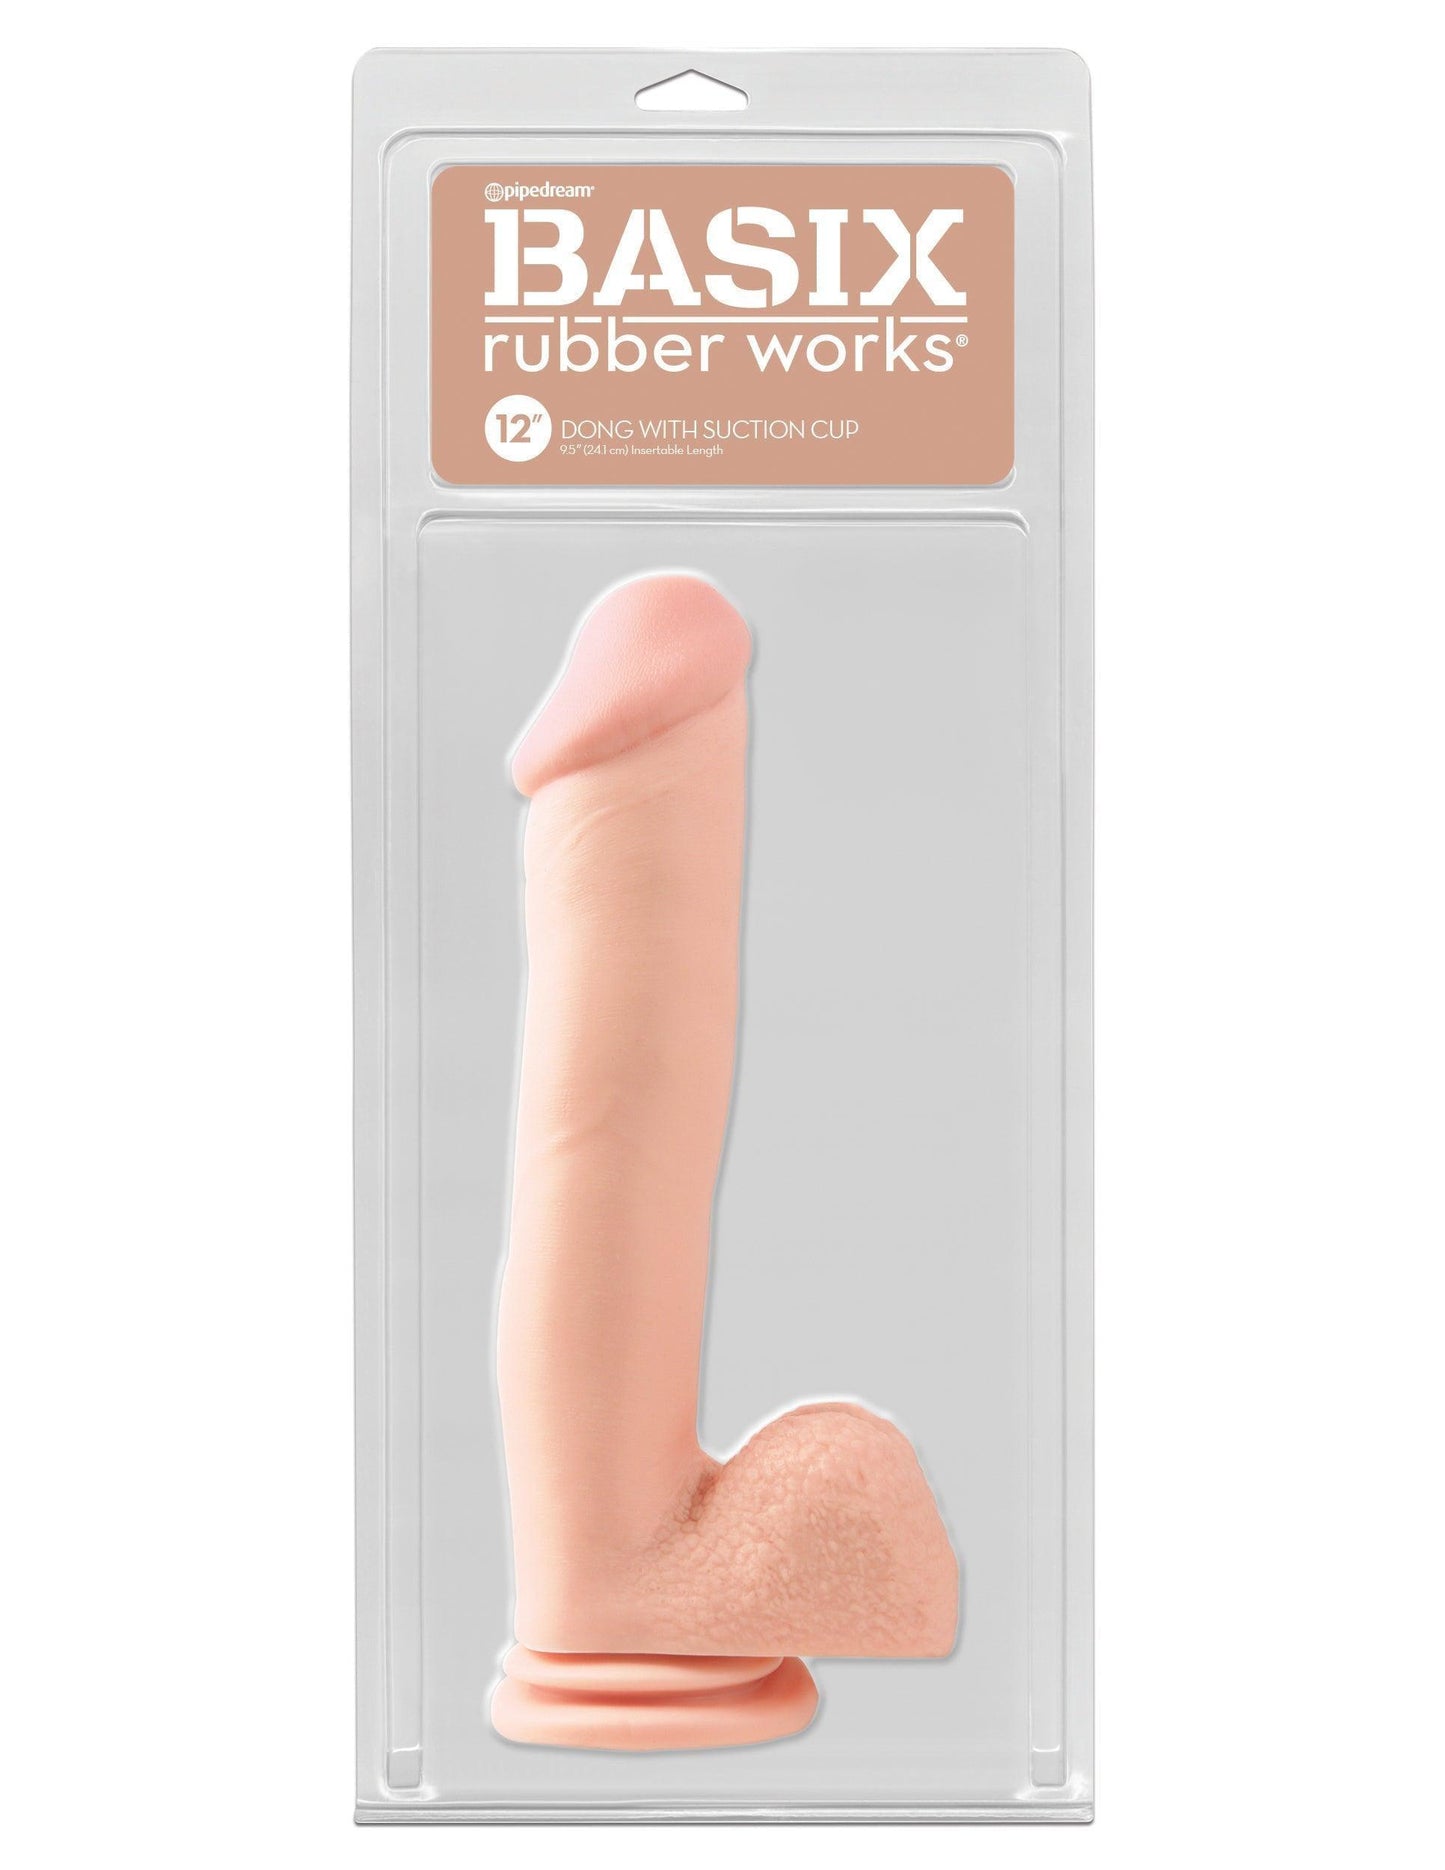 Basix Rubber Works 12 Inch Dong With Suction Cup - Light - My Sex Toy Hub